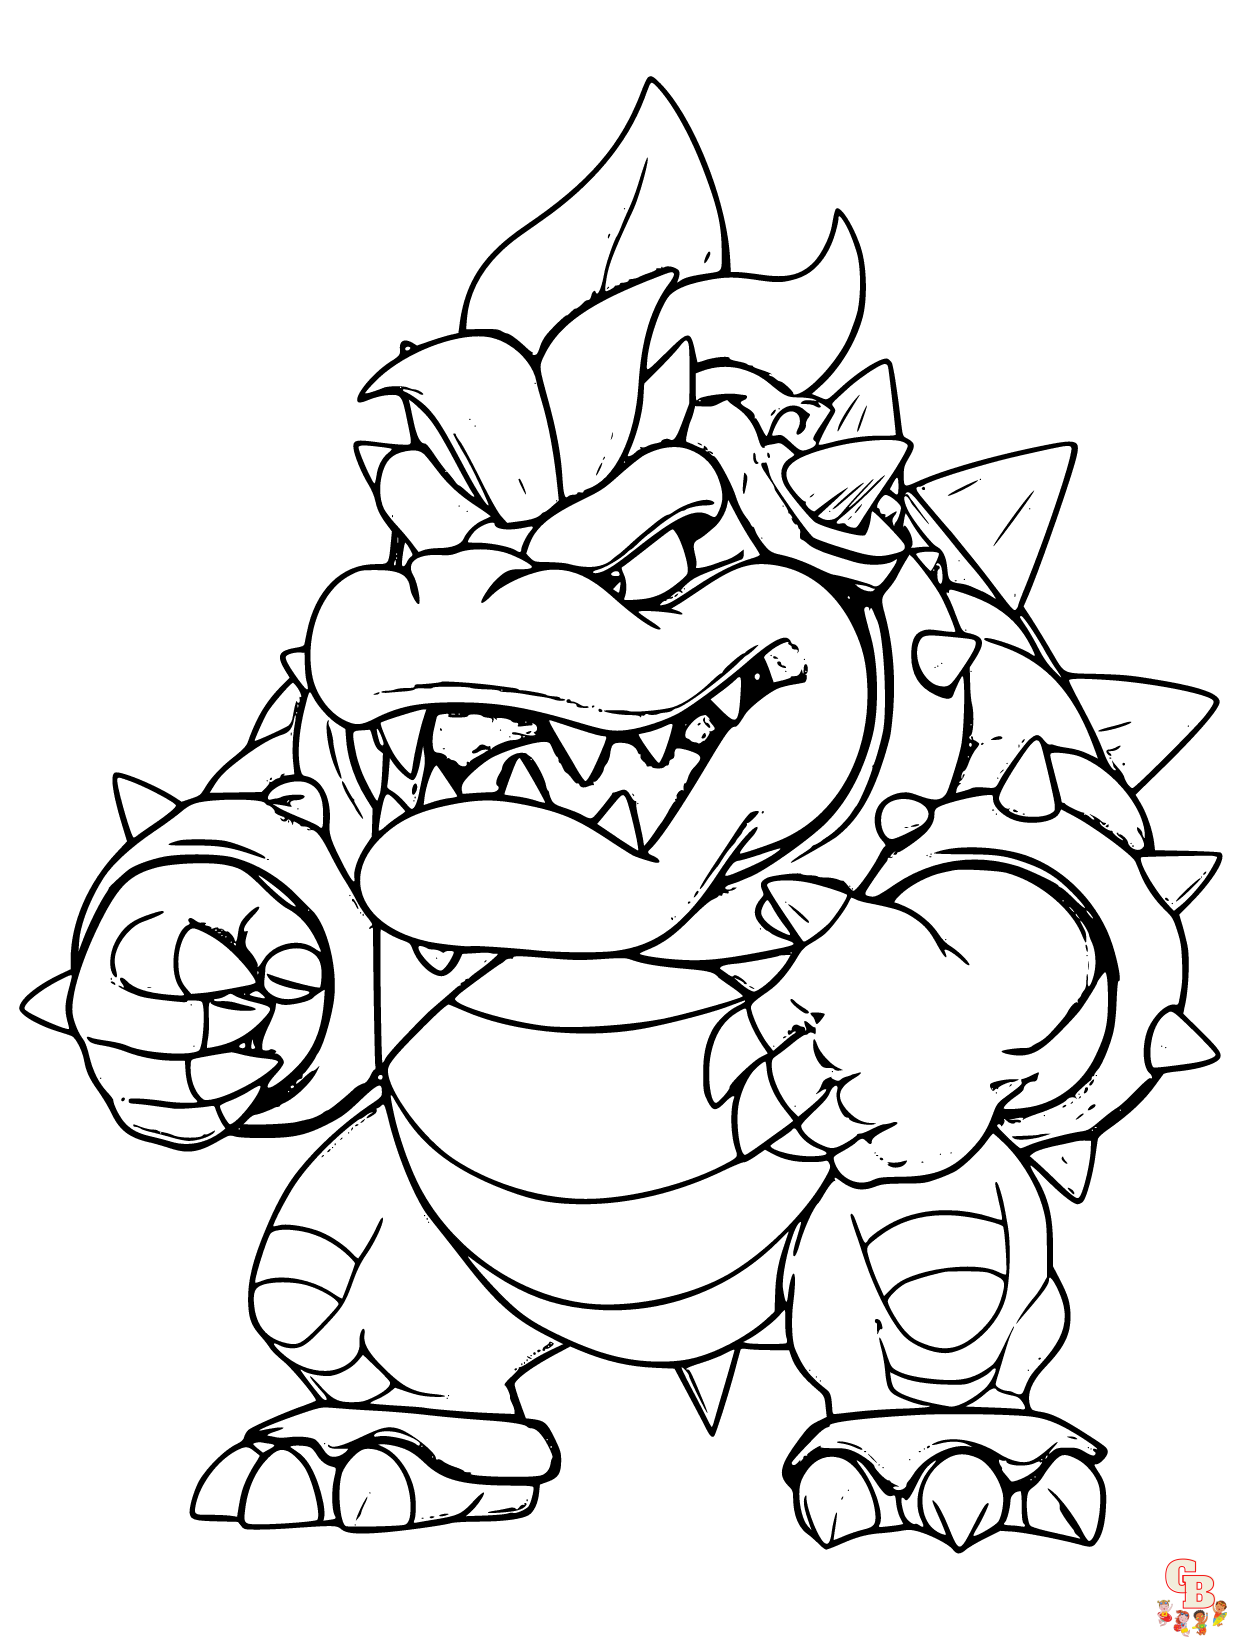 Bowser coloring pages 1